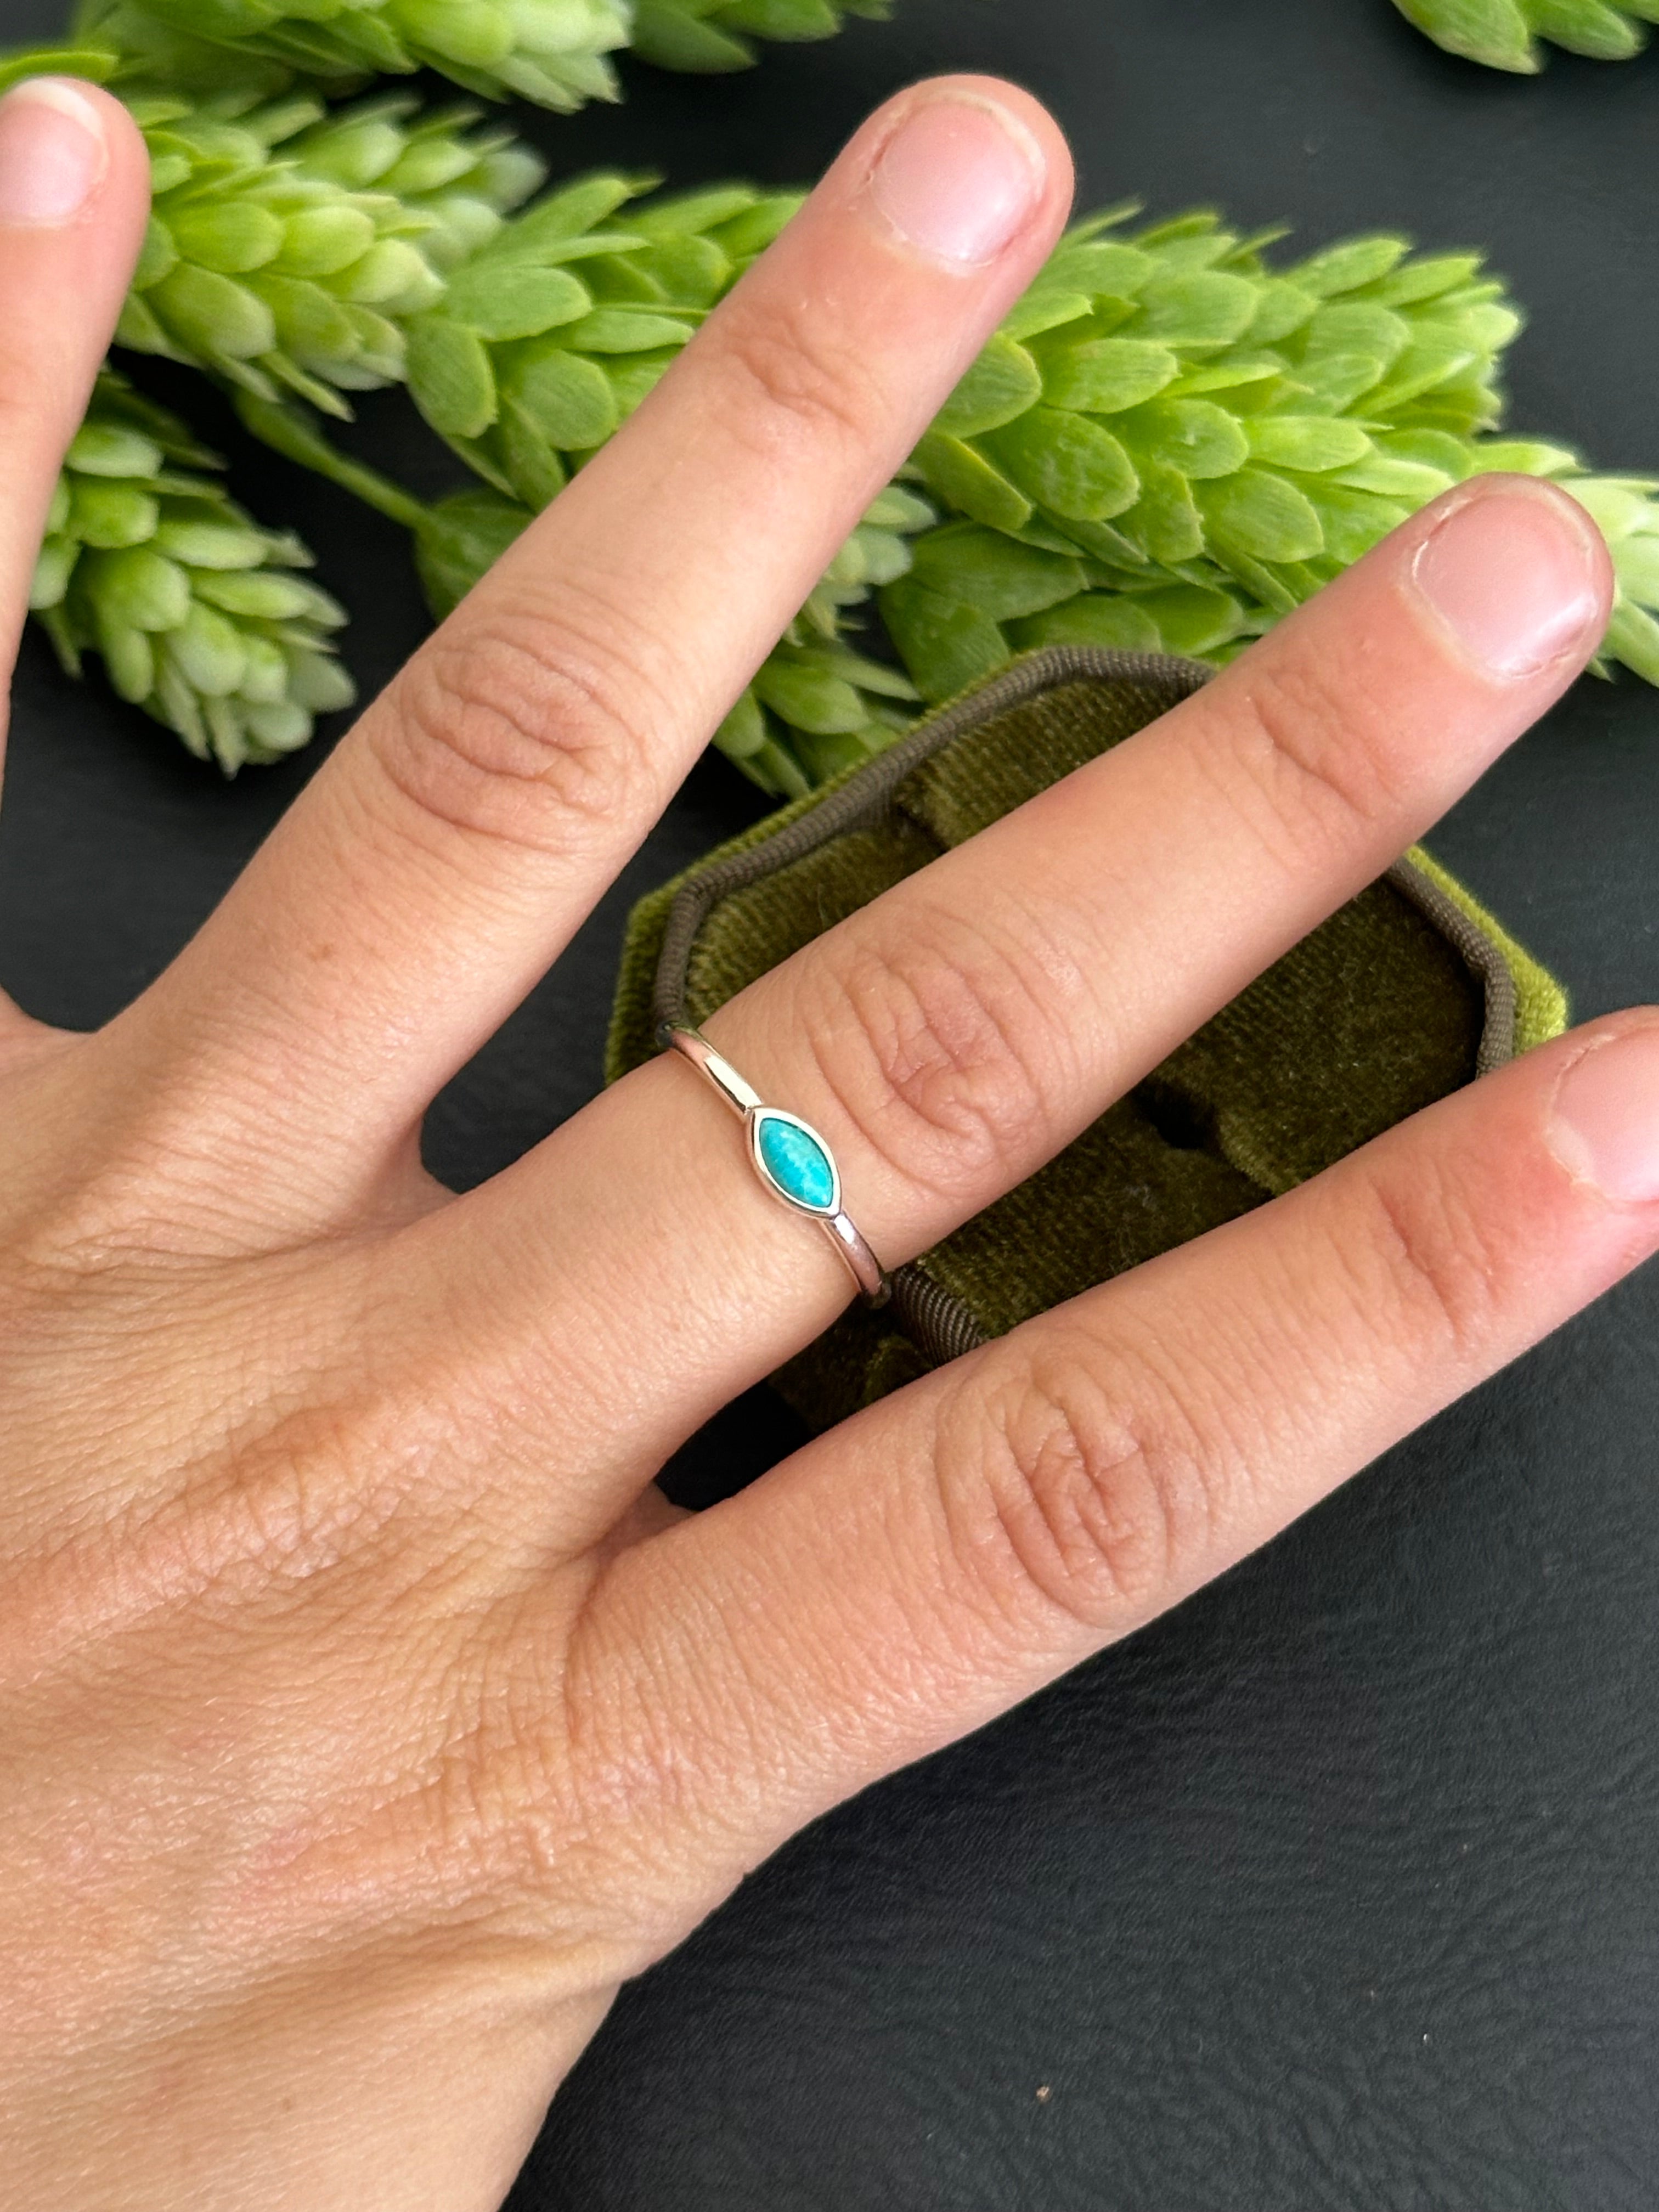 Southwest Handmade Turquoise & Sterling Silver Ring